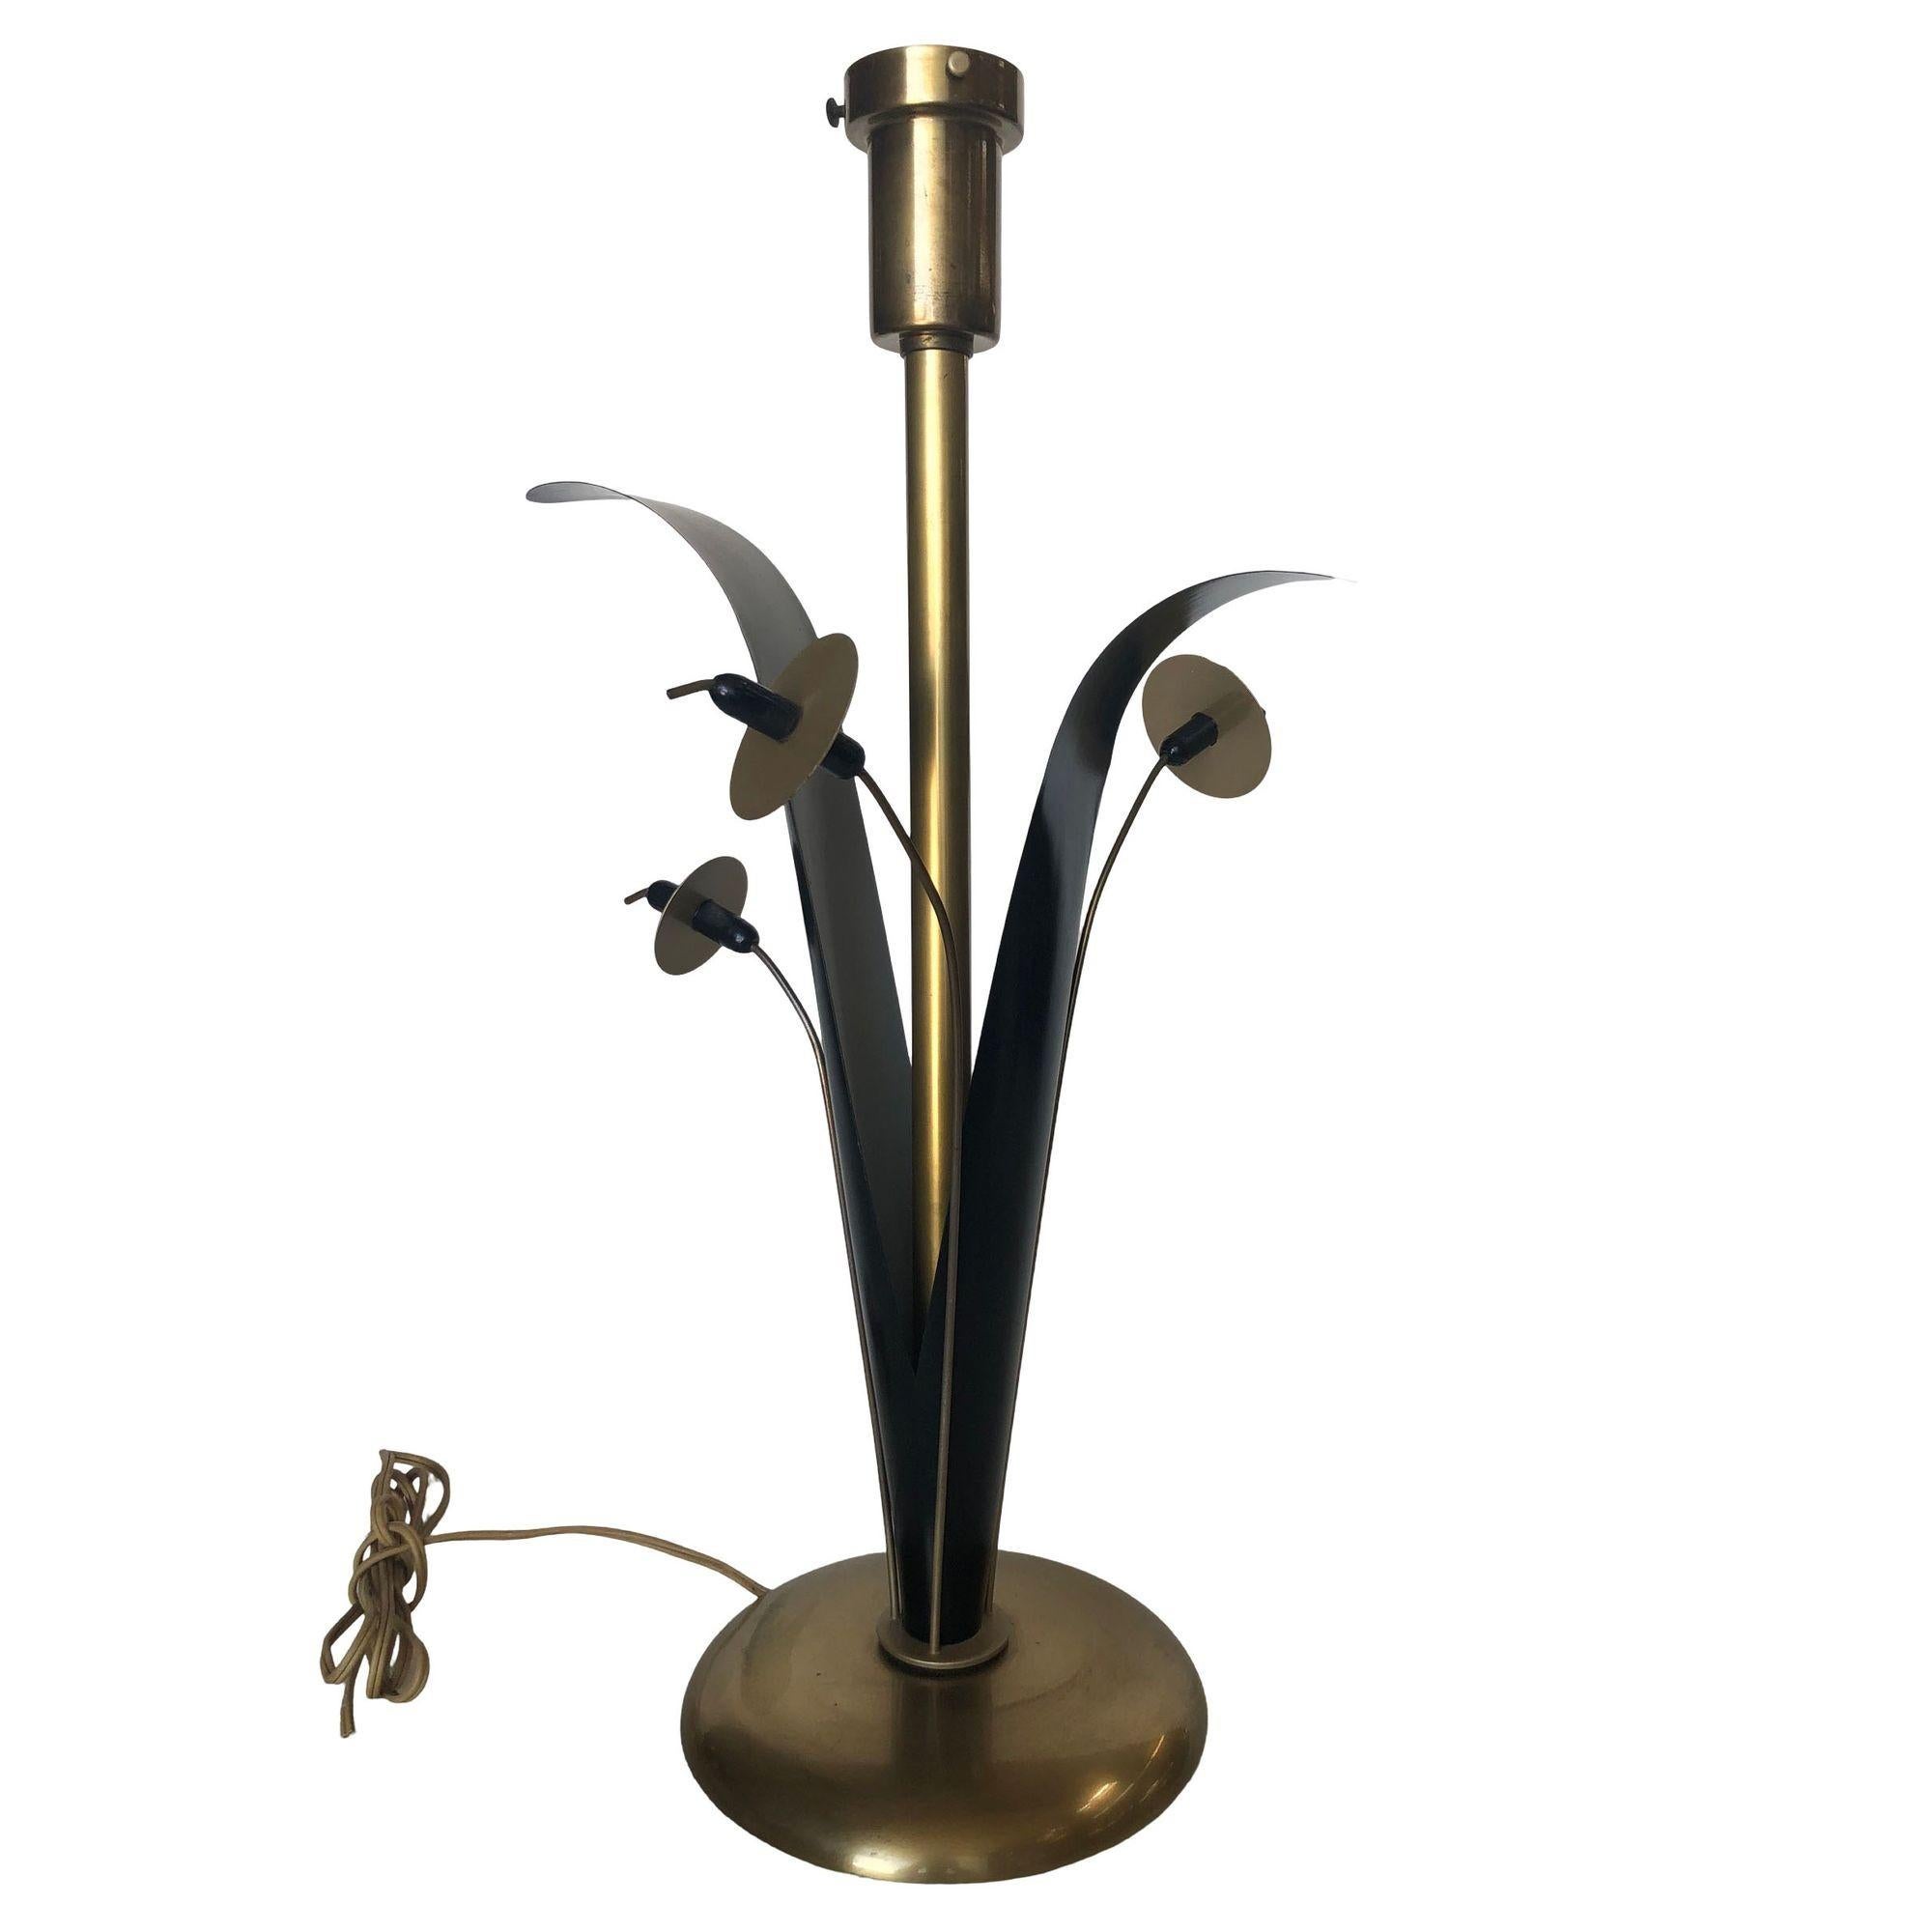 Pair of Mid-century brass and black enamel steel willow table lamps.

Measures: 23